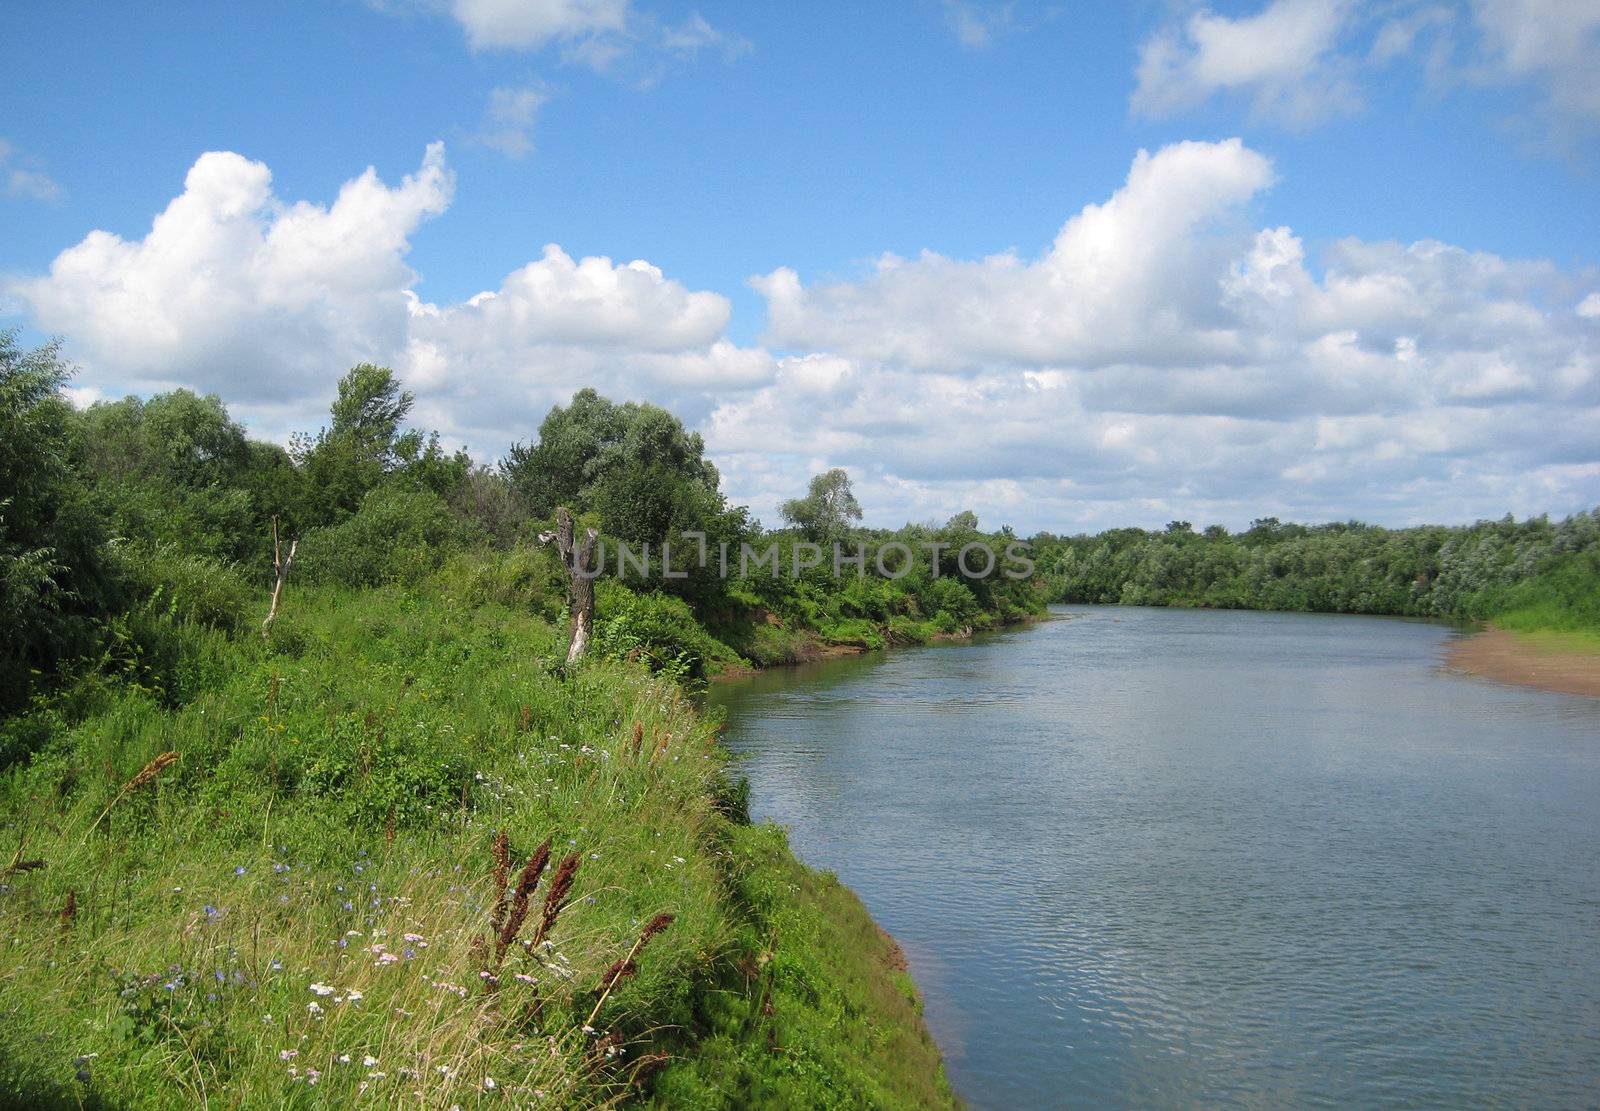 russian summer landscape with river